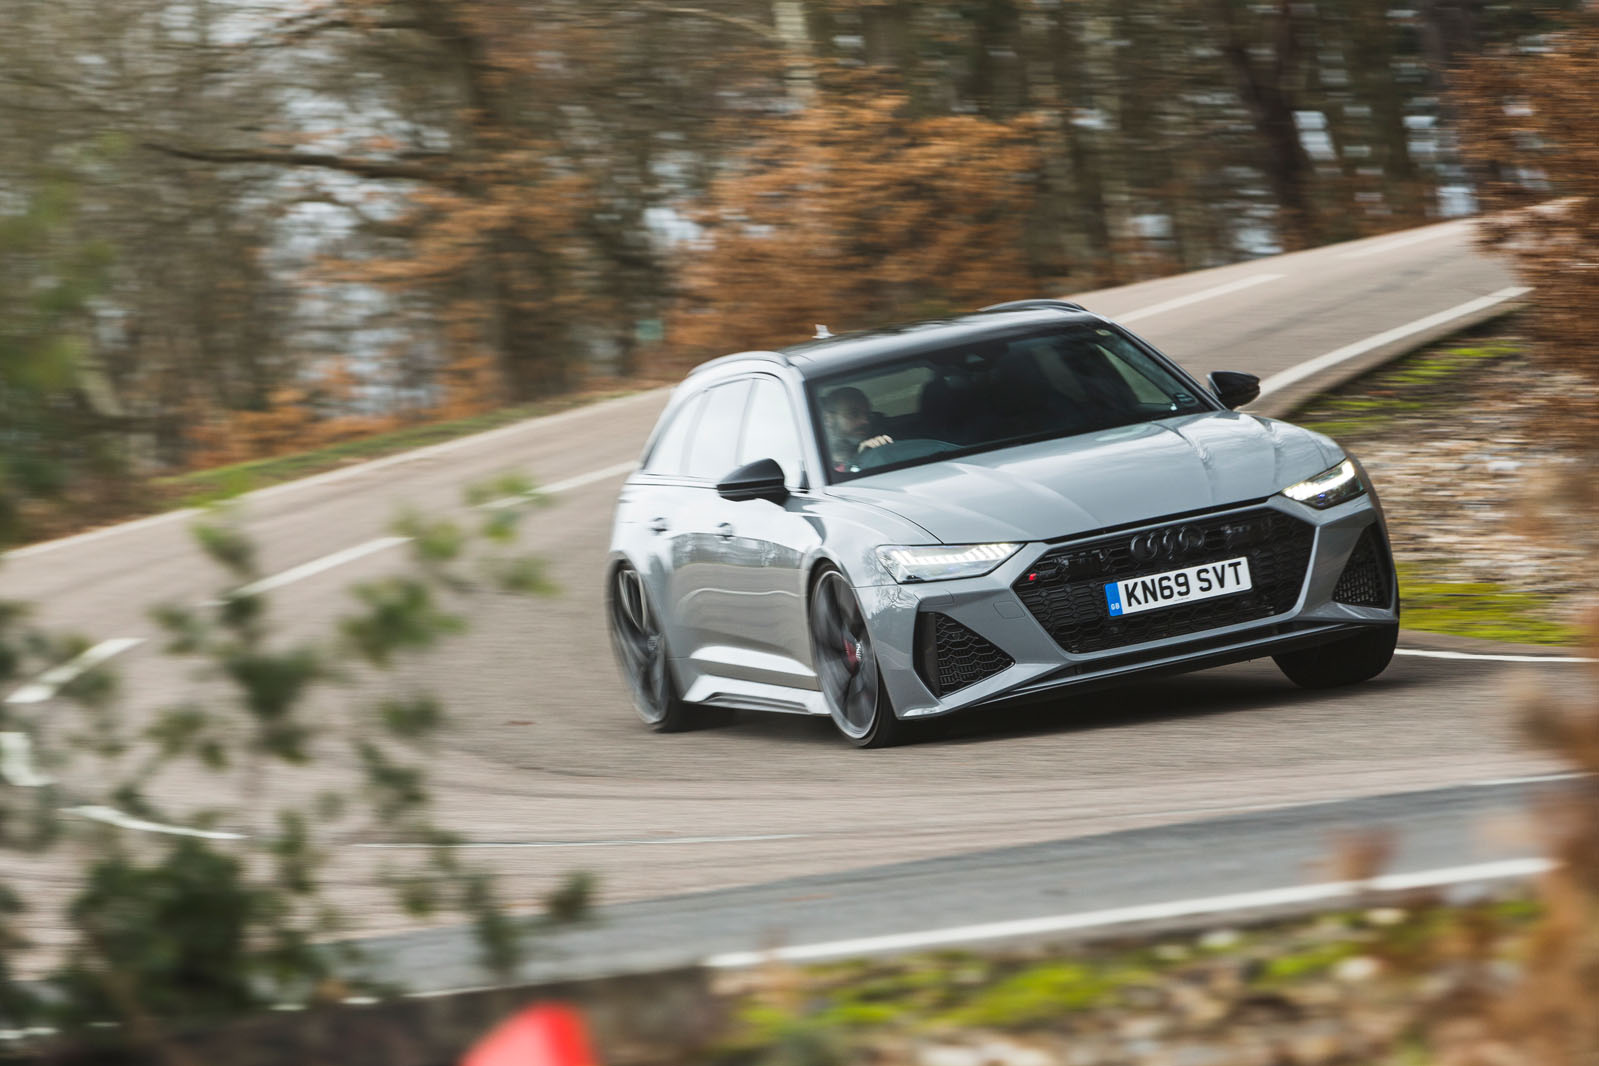 Audi RS6 Avant 2020 road test review - on the road front